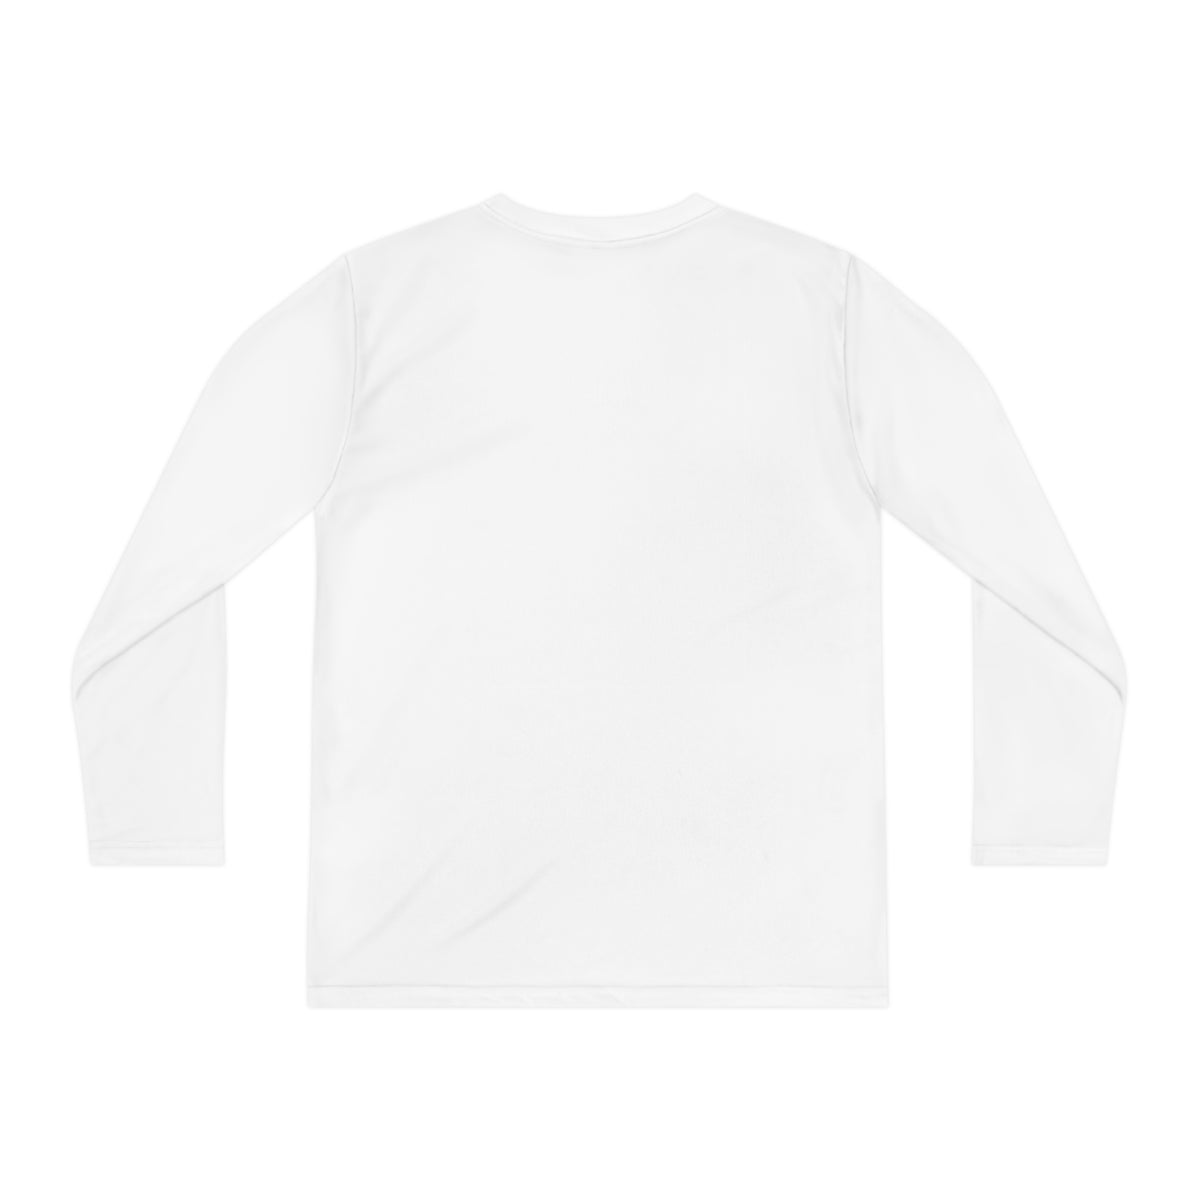 First Academy Drama Team Long Sleeve Competitor Tee - YOUTH